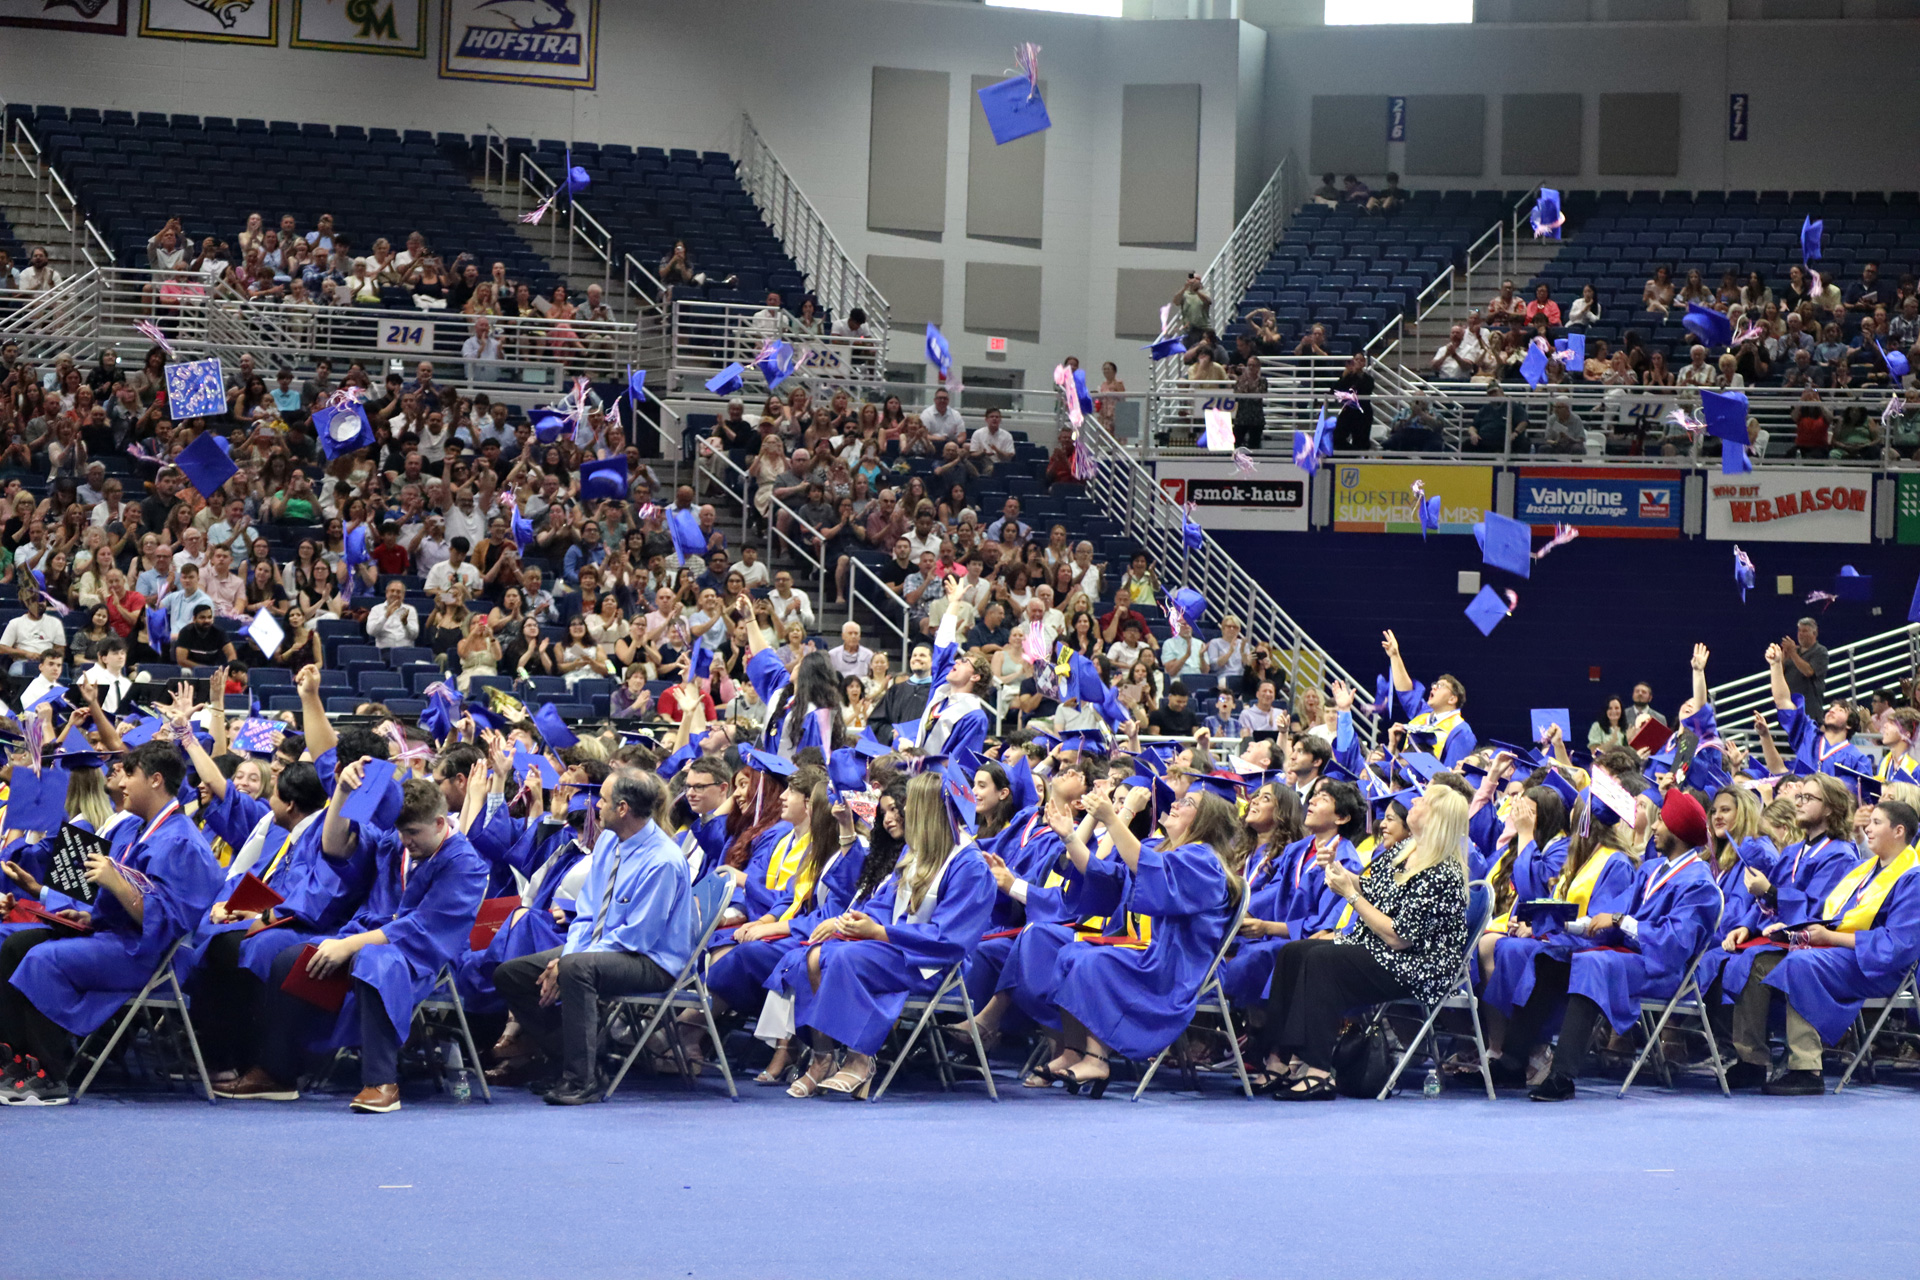 As is tradition, seniors tossed their caps into the air after being named graduates.